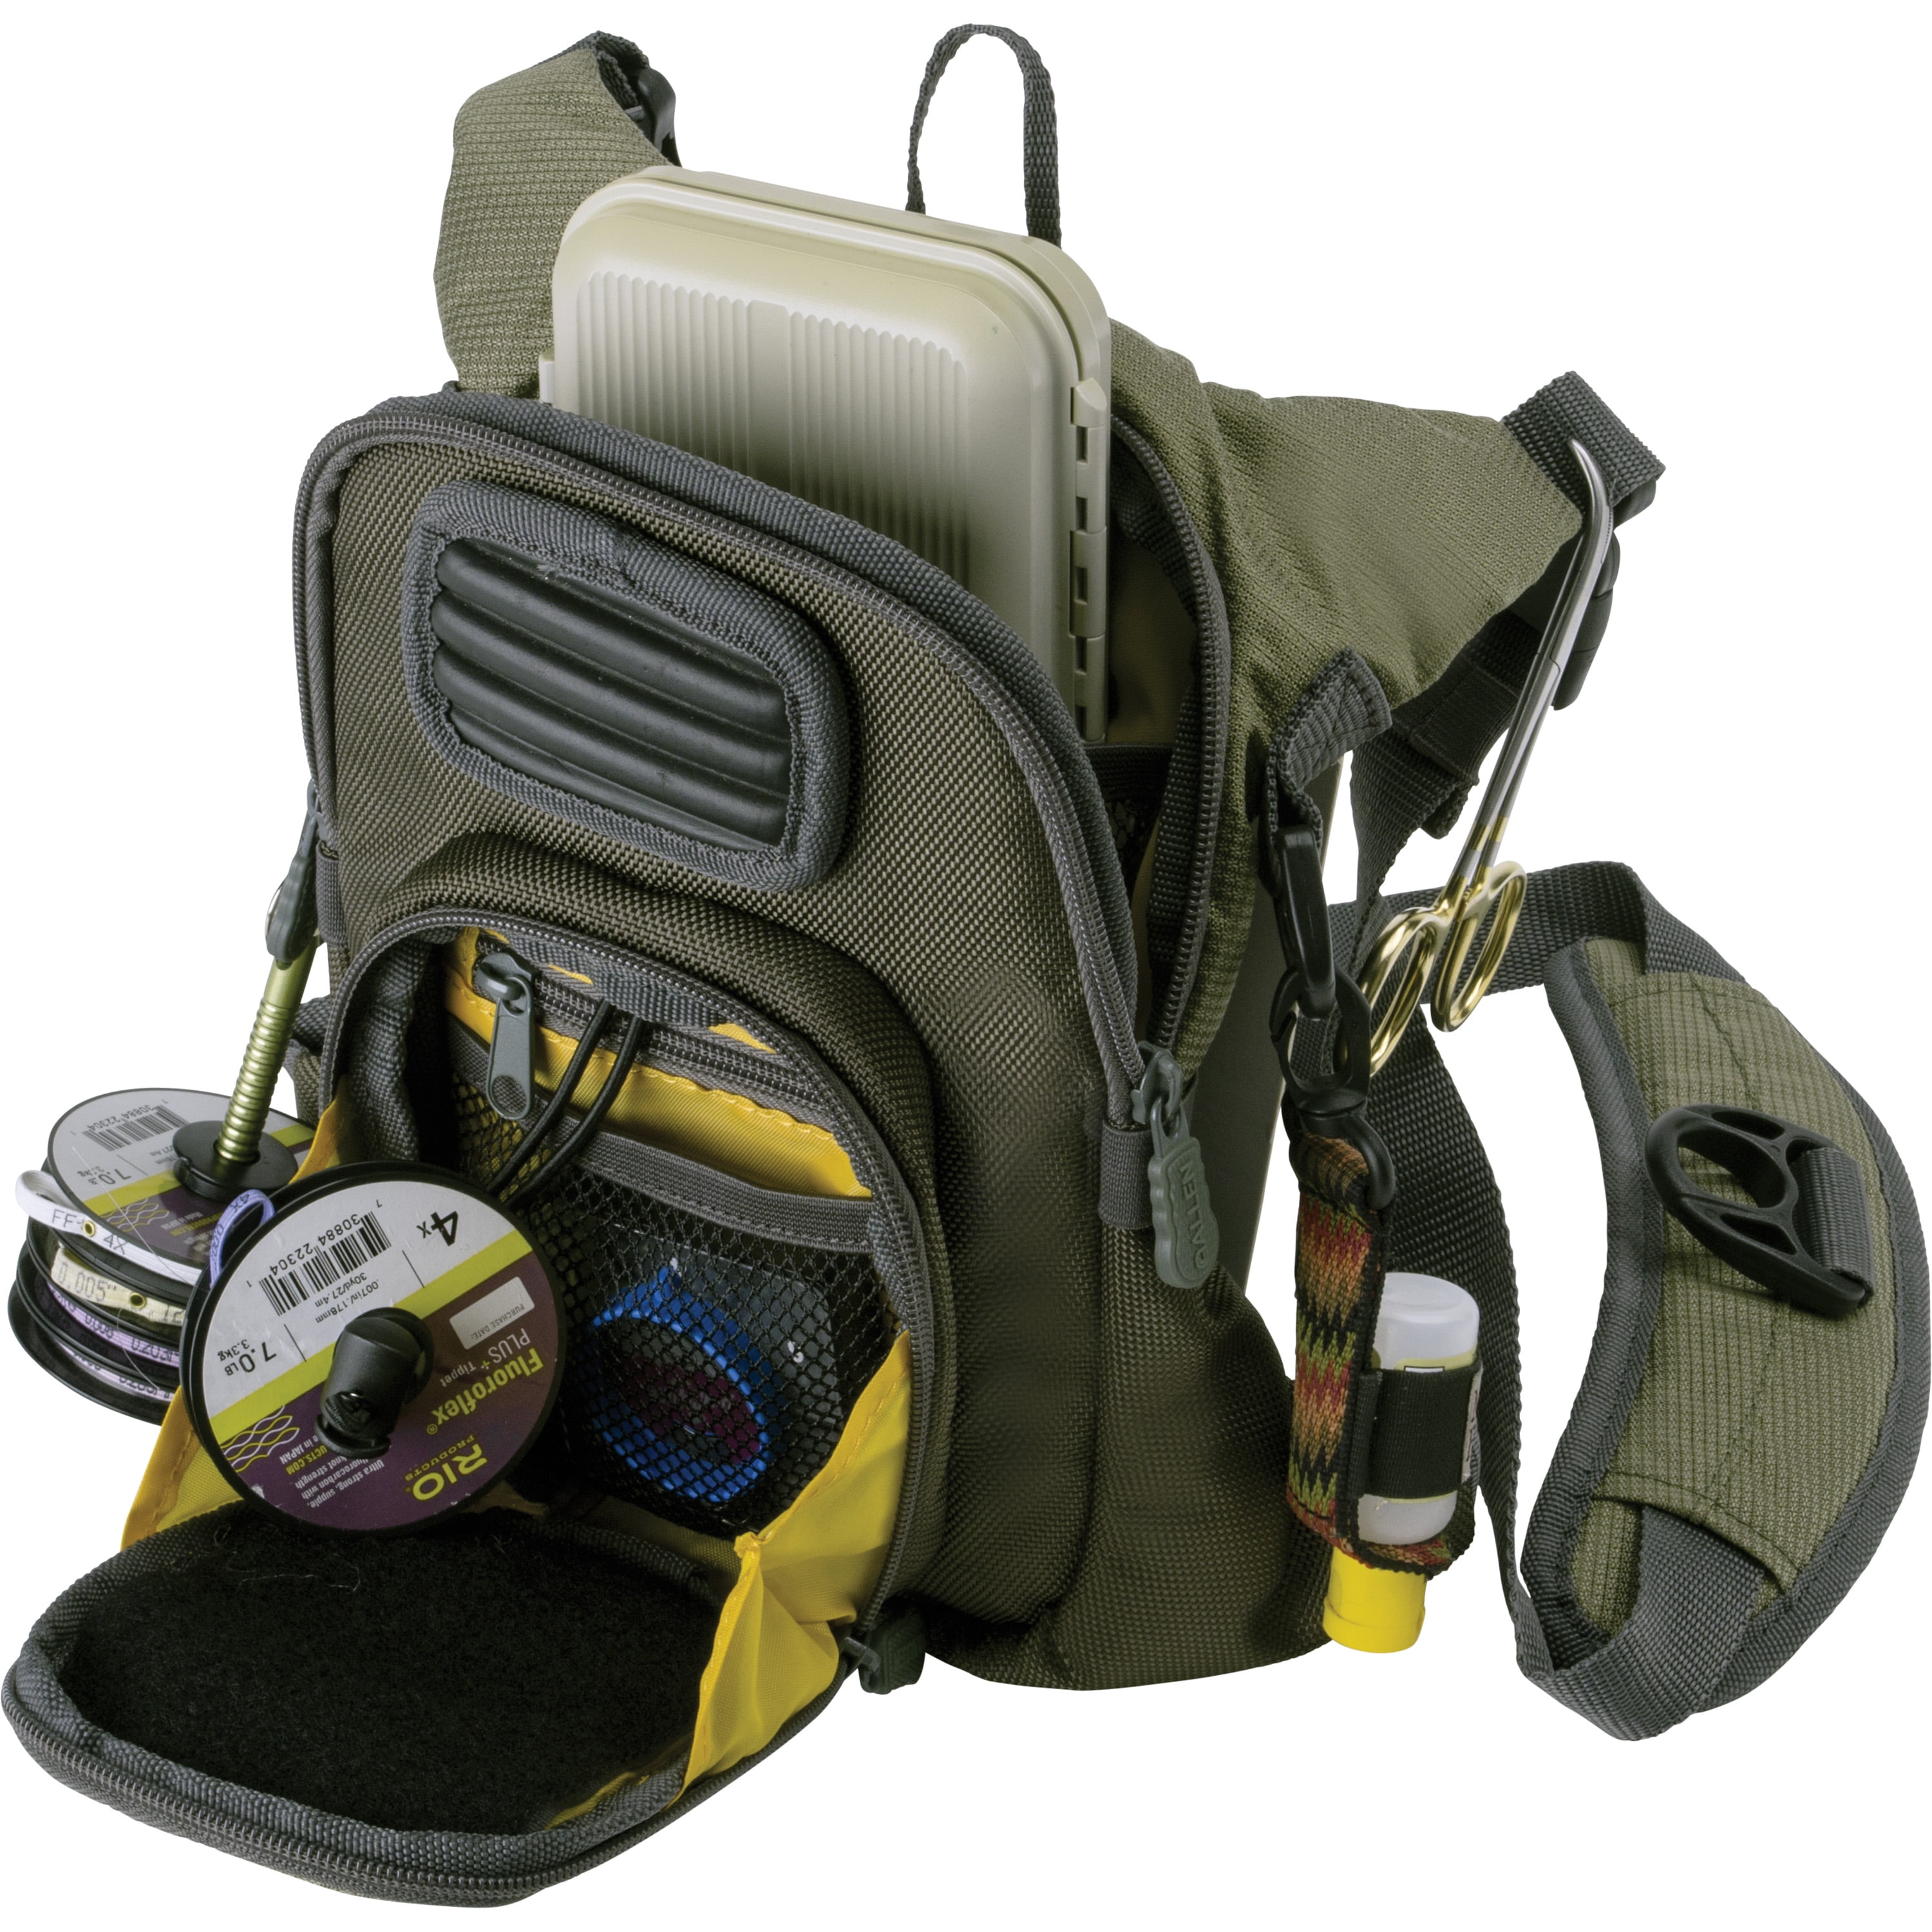 Allen Company Fall River Fly Fishing Chest Pack, Gray/Lime 